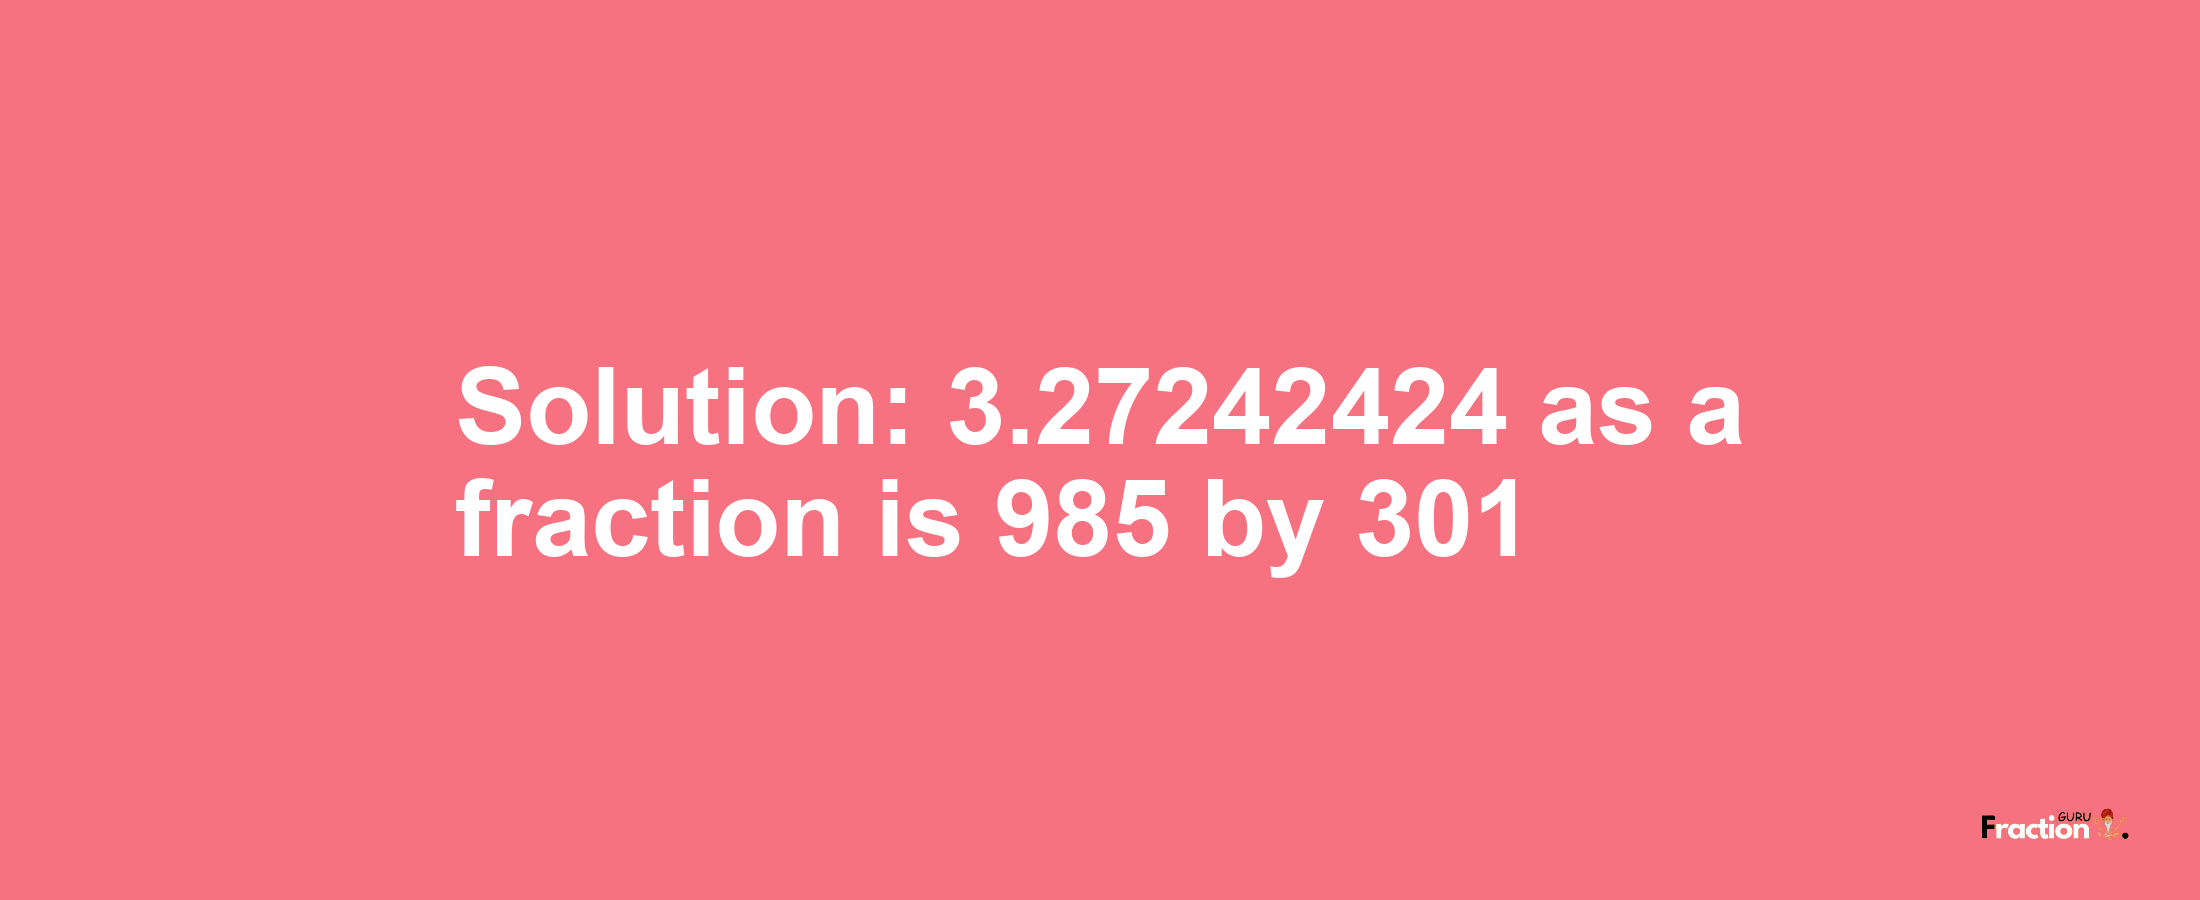 Solution:3.27242424 as a fraction is 985/301